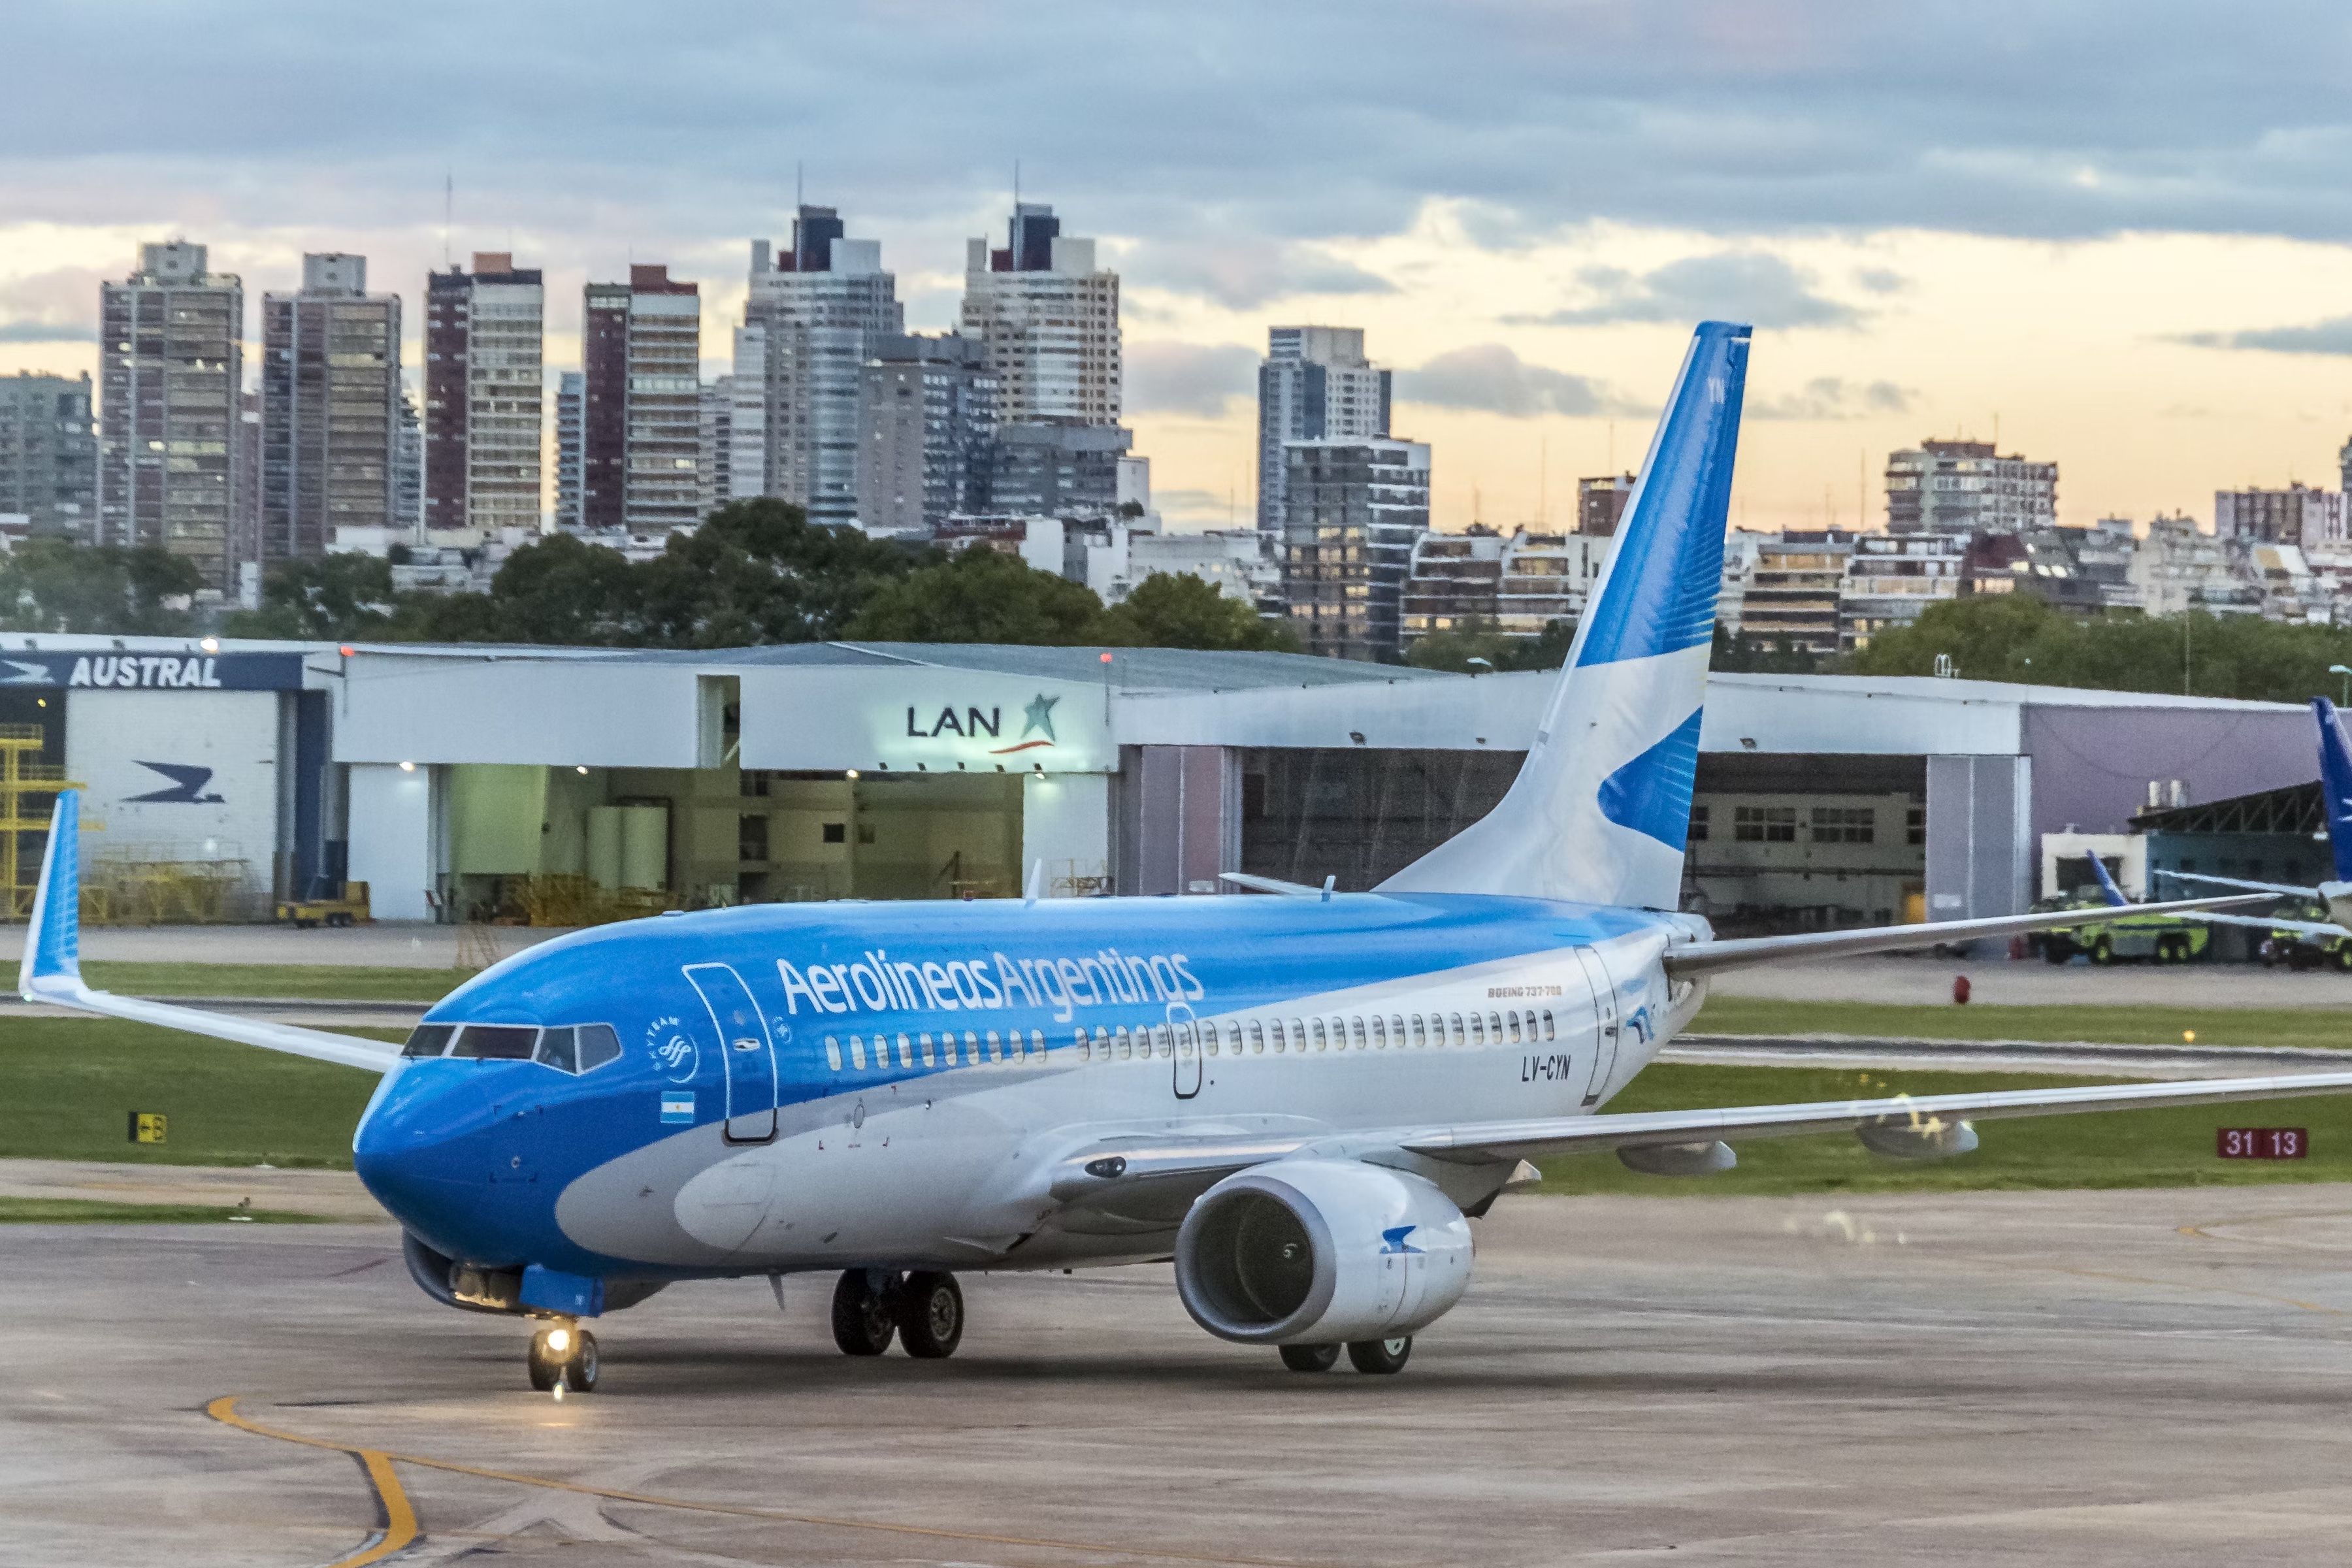 An Aerolineas Argentinas aircraft taxiing in Buenos Aires.